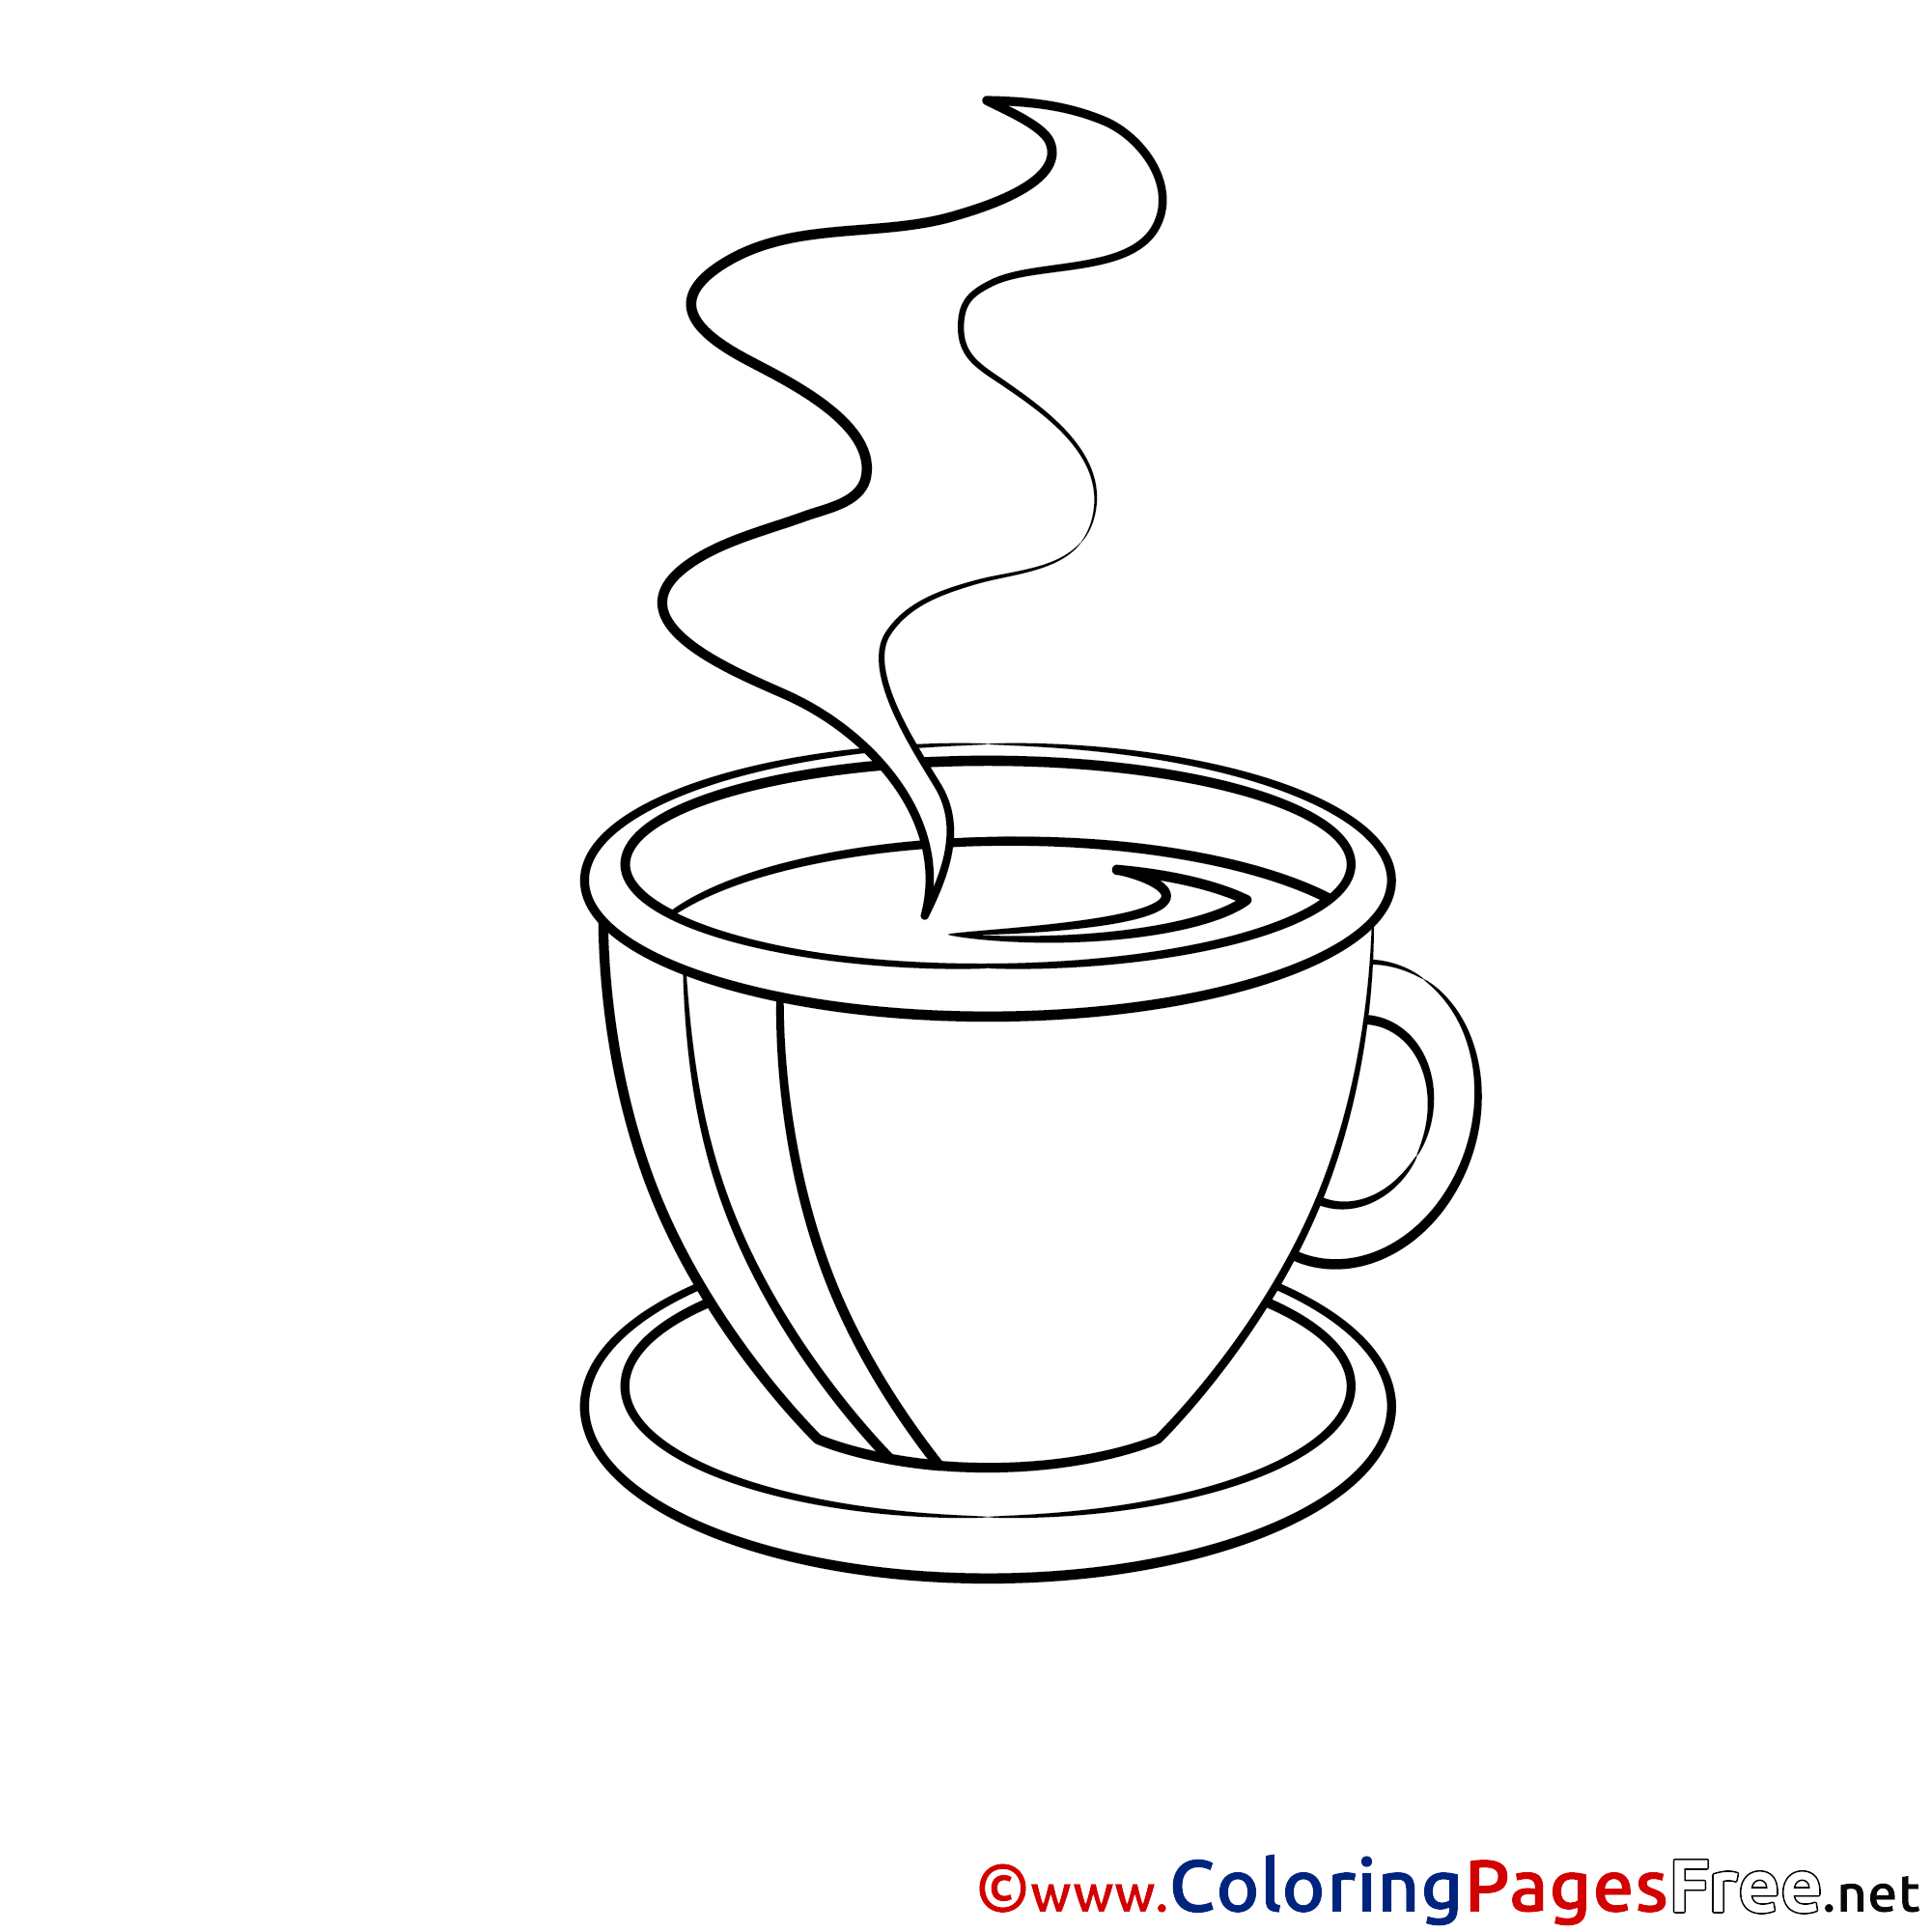 printable-coffee-coloring-pages